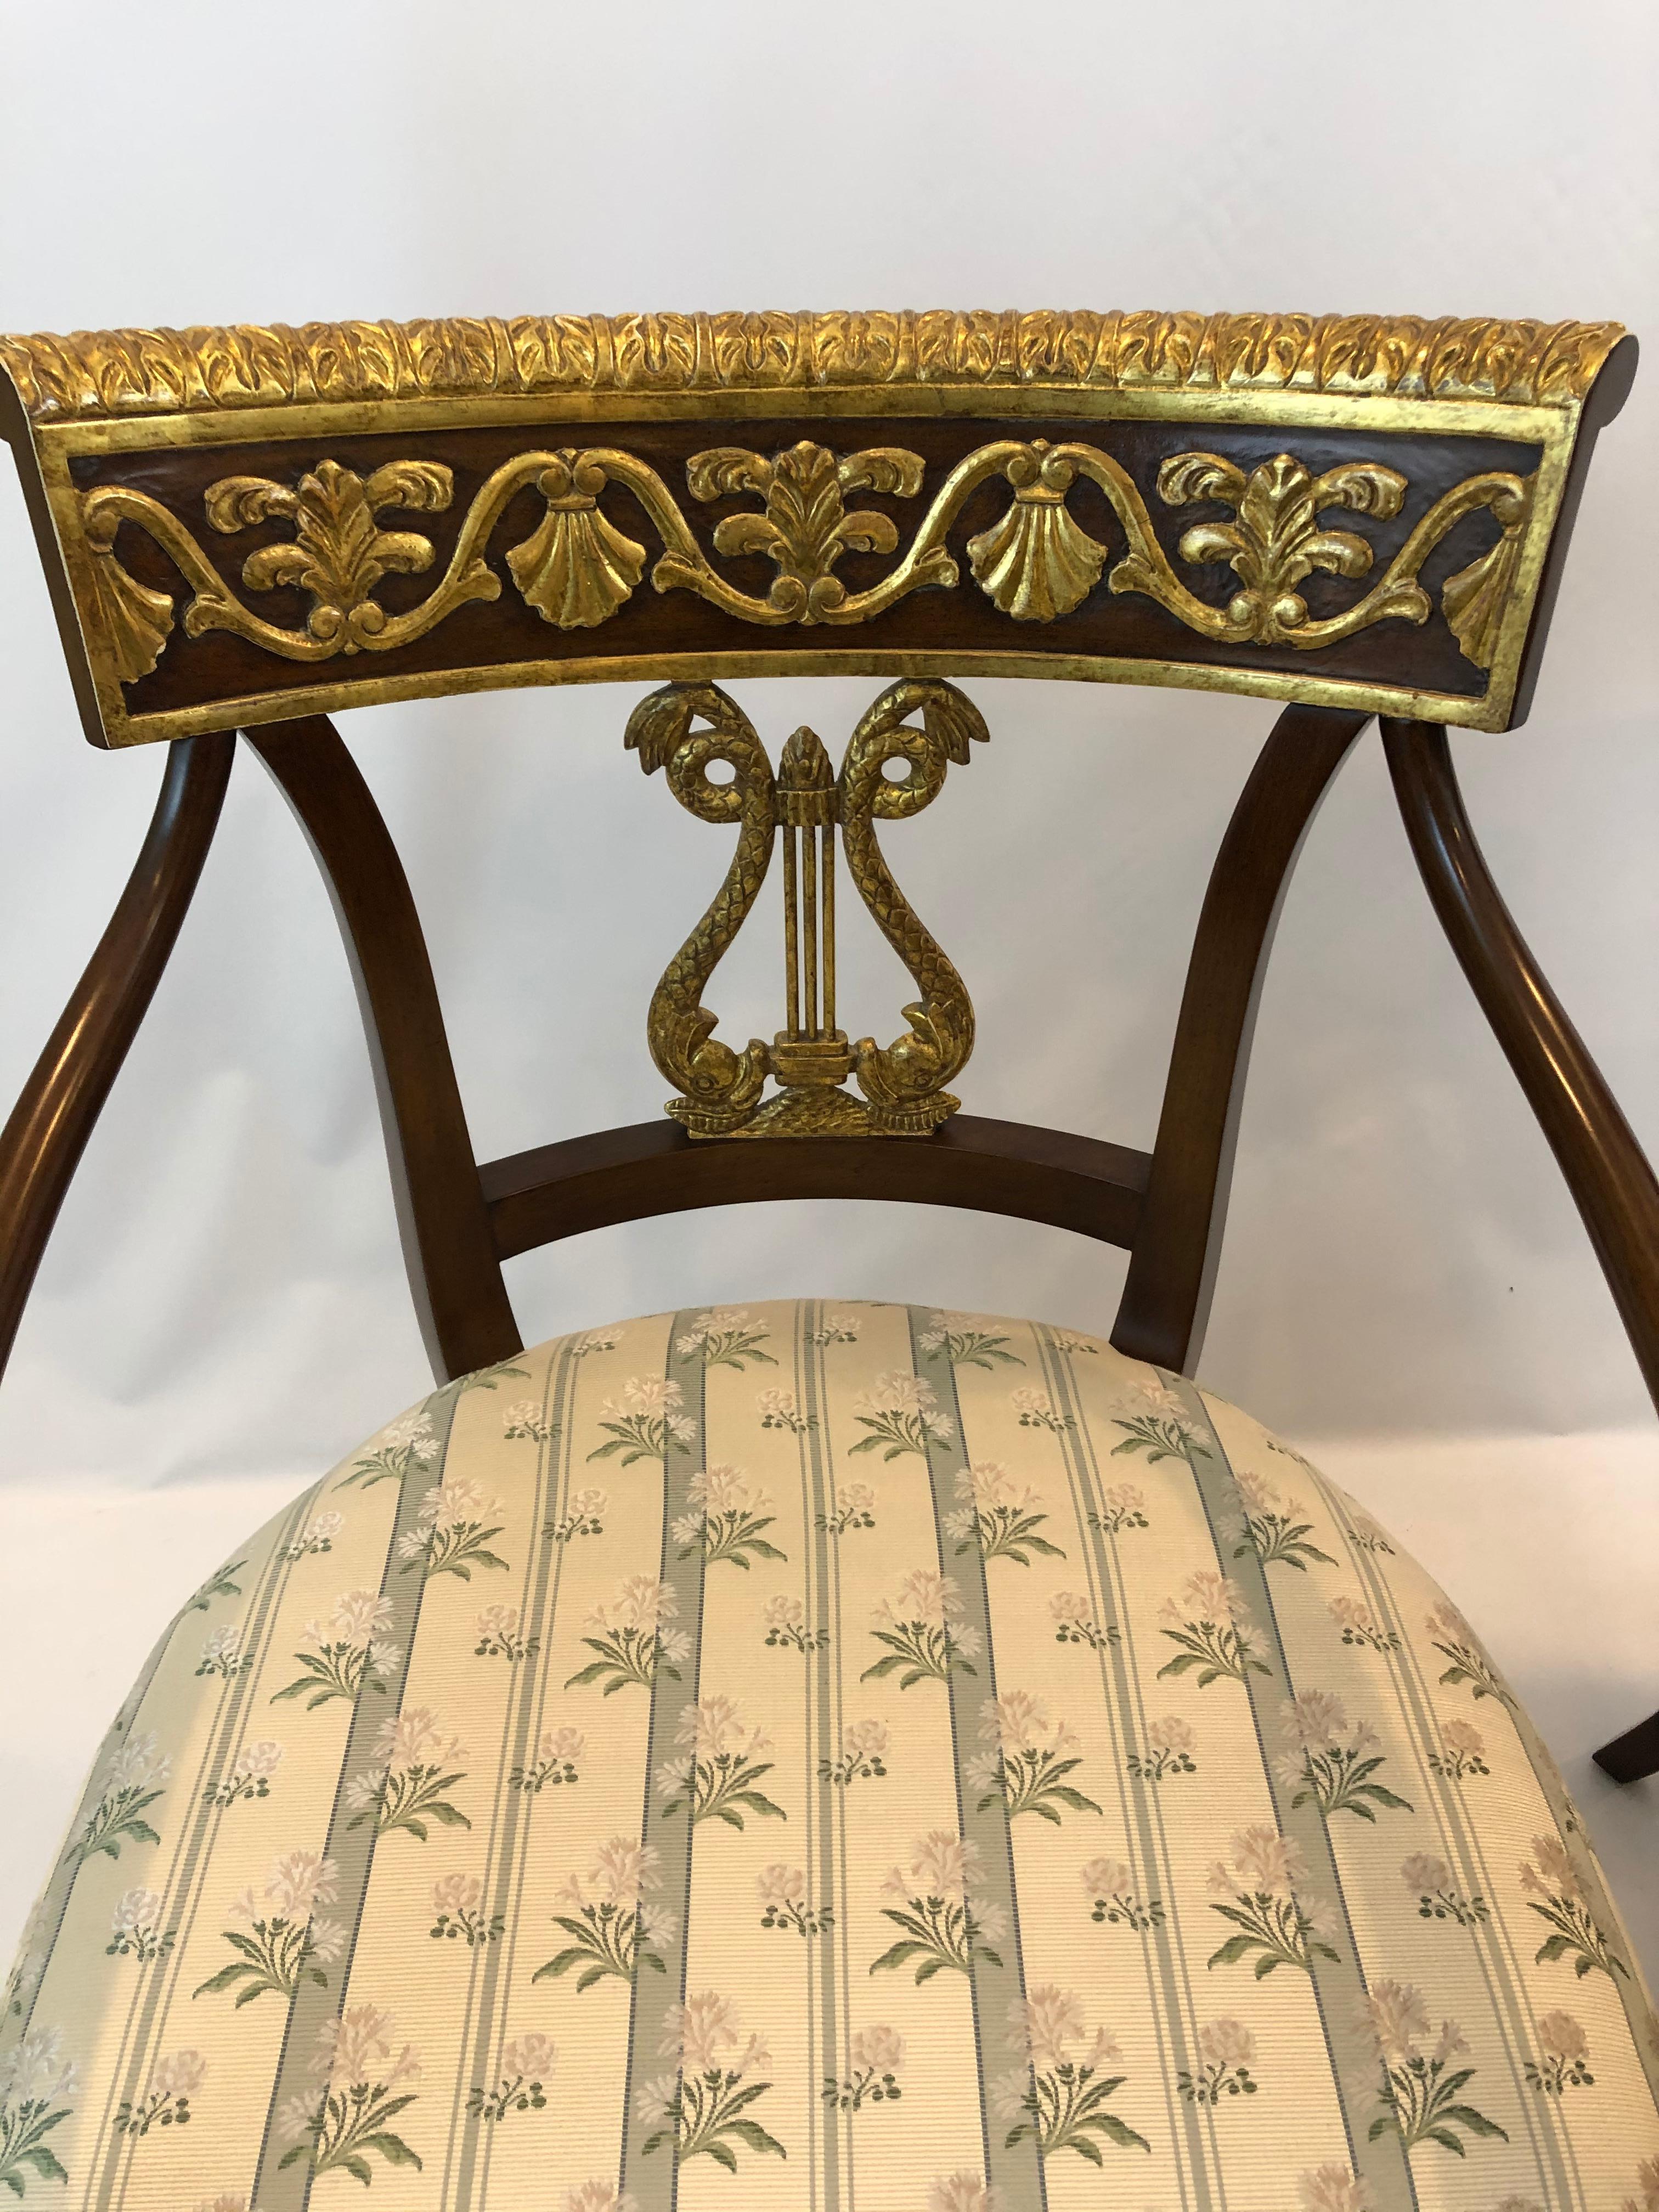 Magnificent pair of Regency style carved wood armchairs having gorgeous gold leaf decoration with lyre backs, florets on the arms and fabulous hoof feet at the front.
Arm height 26 (27.5 high at back of arm).